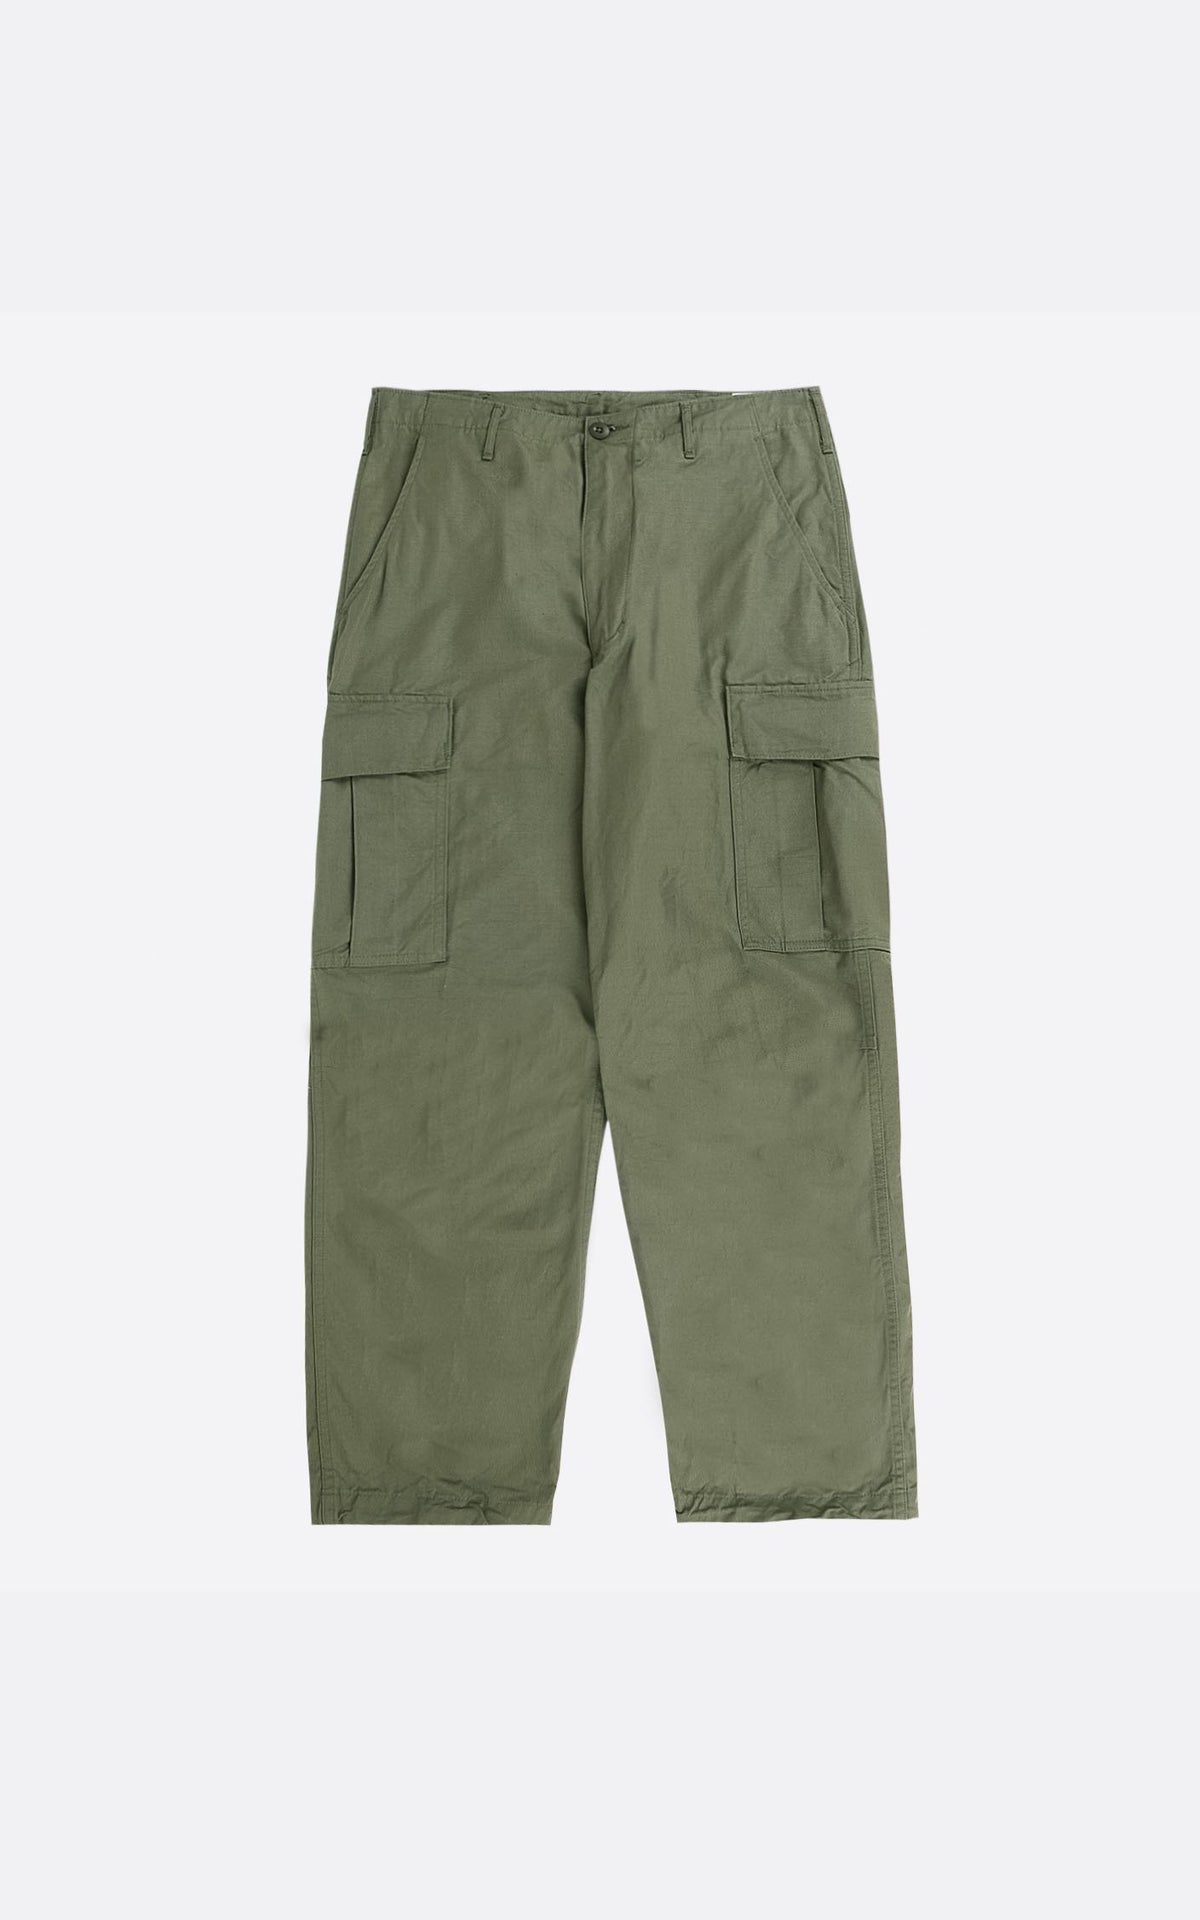 VINTAGE FIT 6 POCKETS CARGO PANTS ARMY GREEN